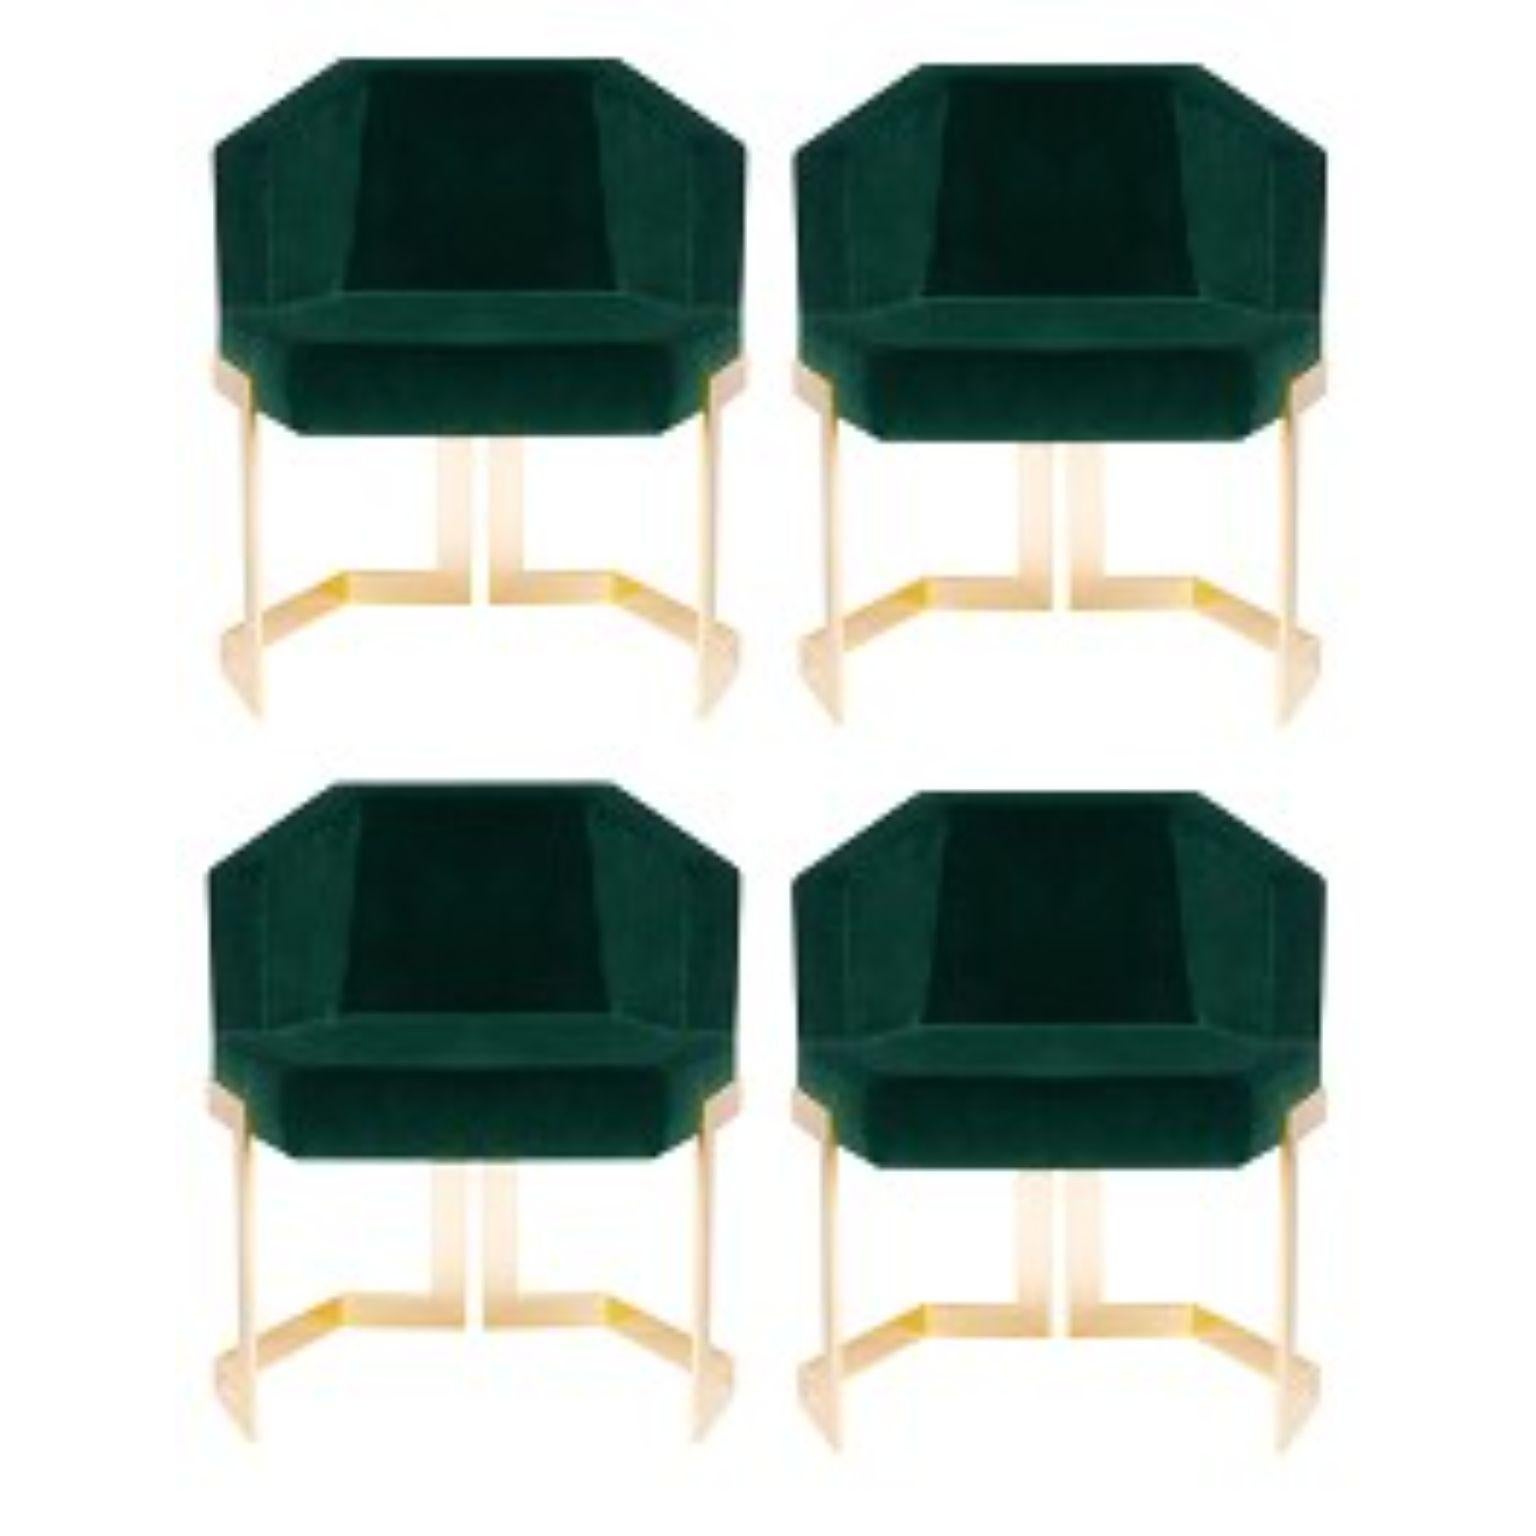 Set of 4 the hive dining chairs, Royal Stranger
Dimensions: 65.5 x 55 x 79 cm
Materials: Velvet. Legs polished brass.


A chair with an extremely luxurious vision. The Hive chair, as the name implies, is strong and robust in nature, its